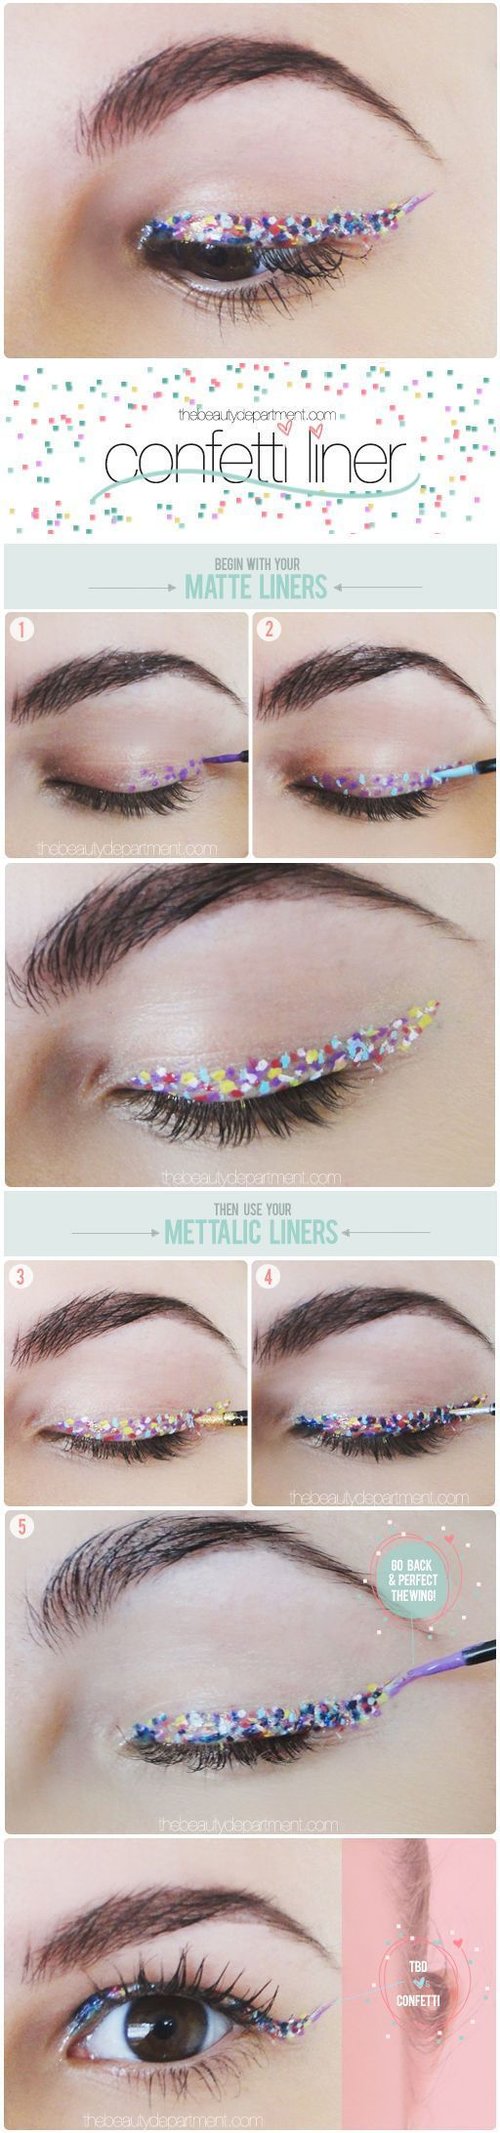 Make your own confetti liners